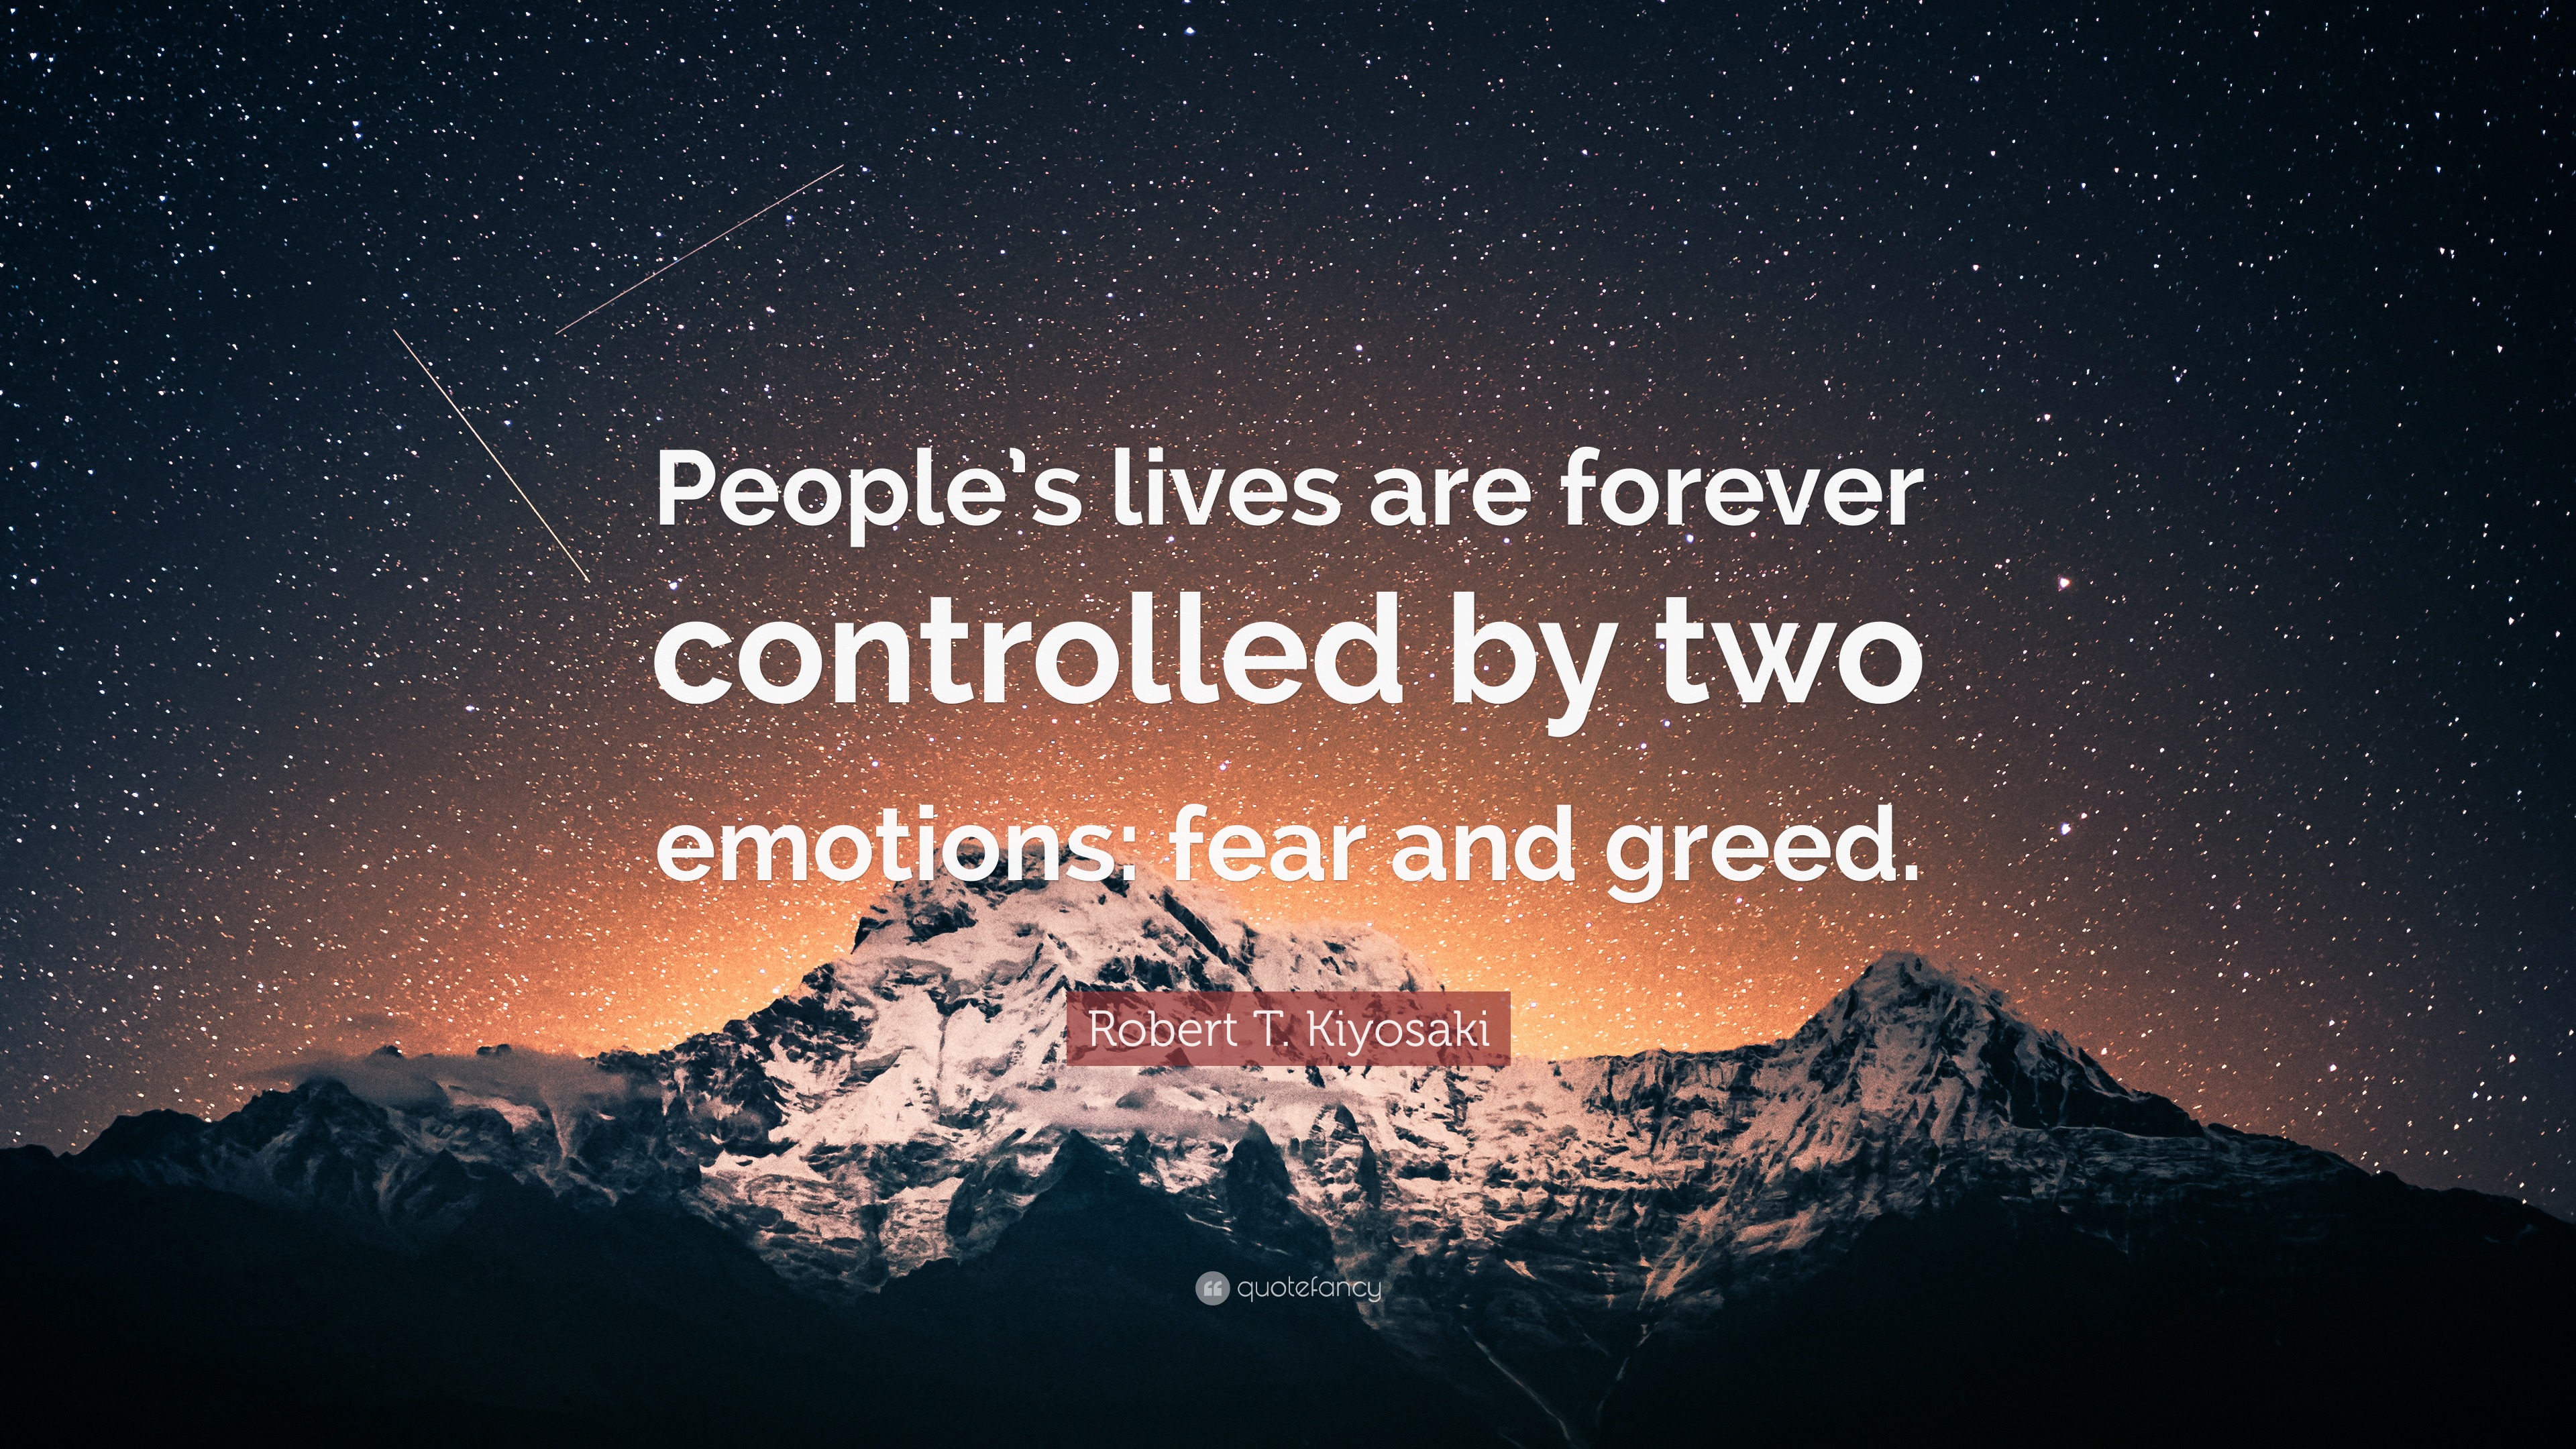 Robert T. Kiyosaki Quote: “People’s lives are forever controlled by two